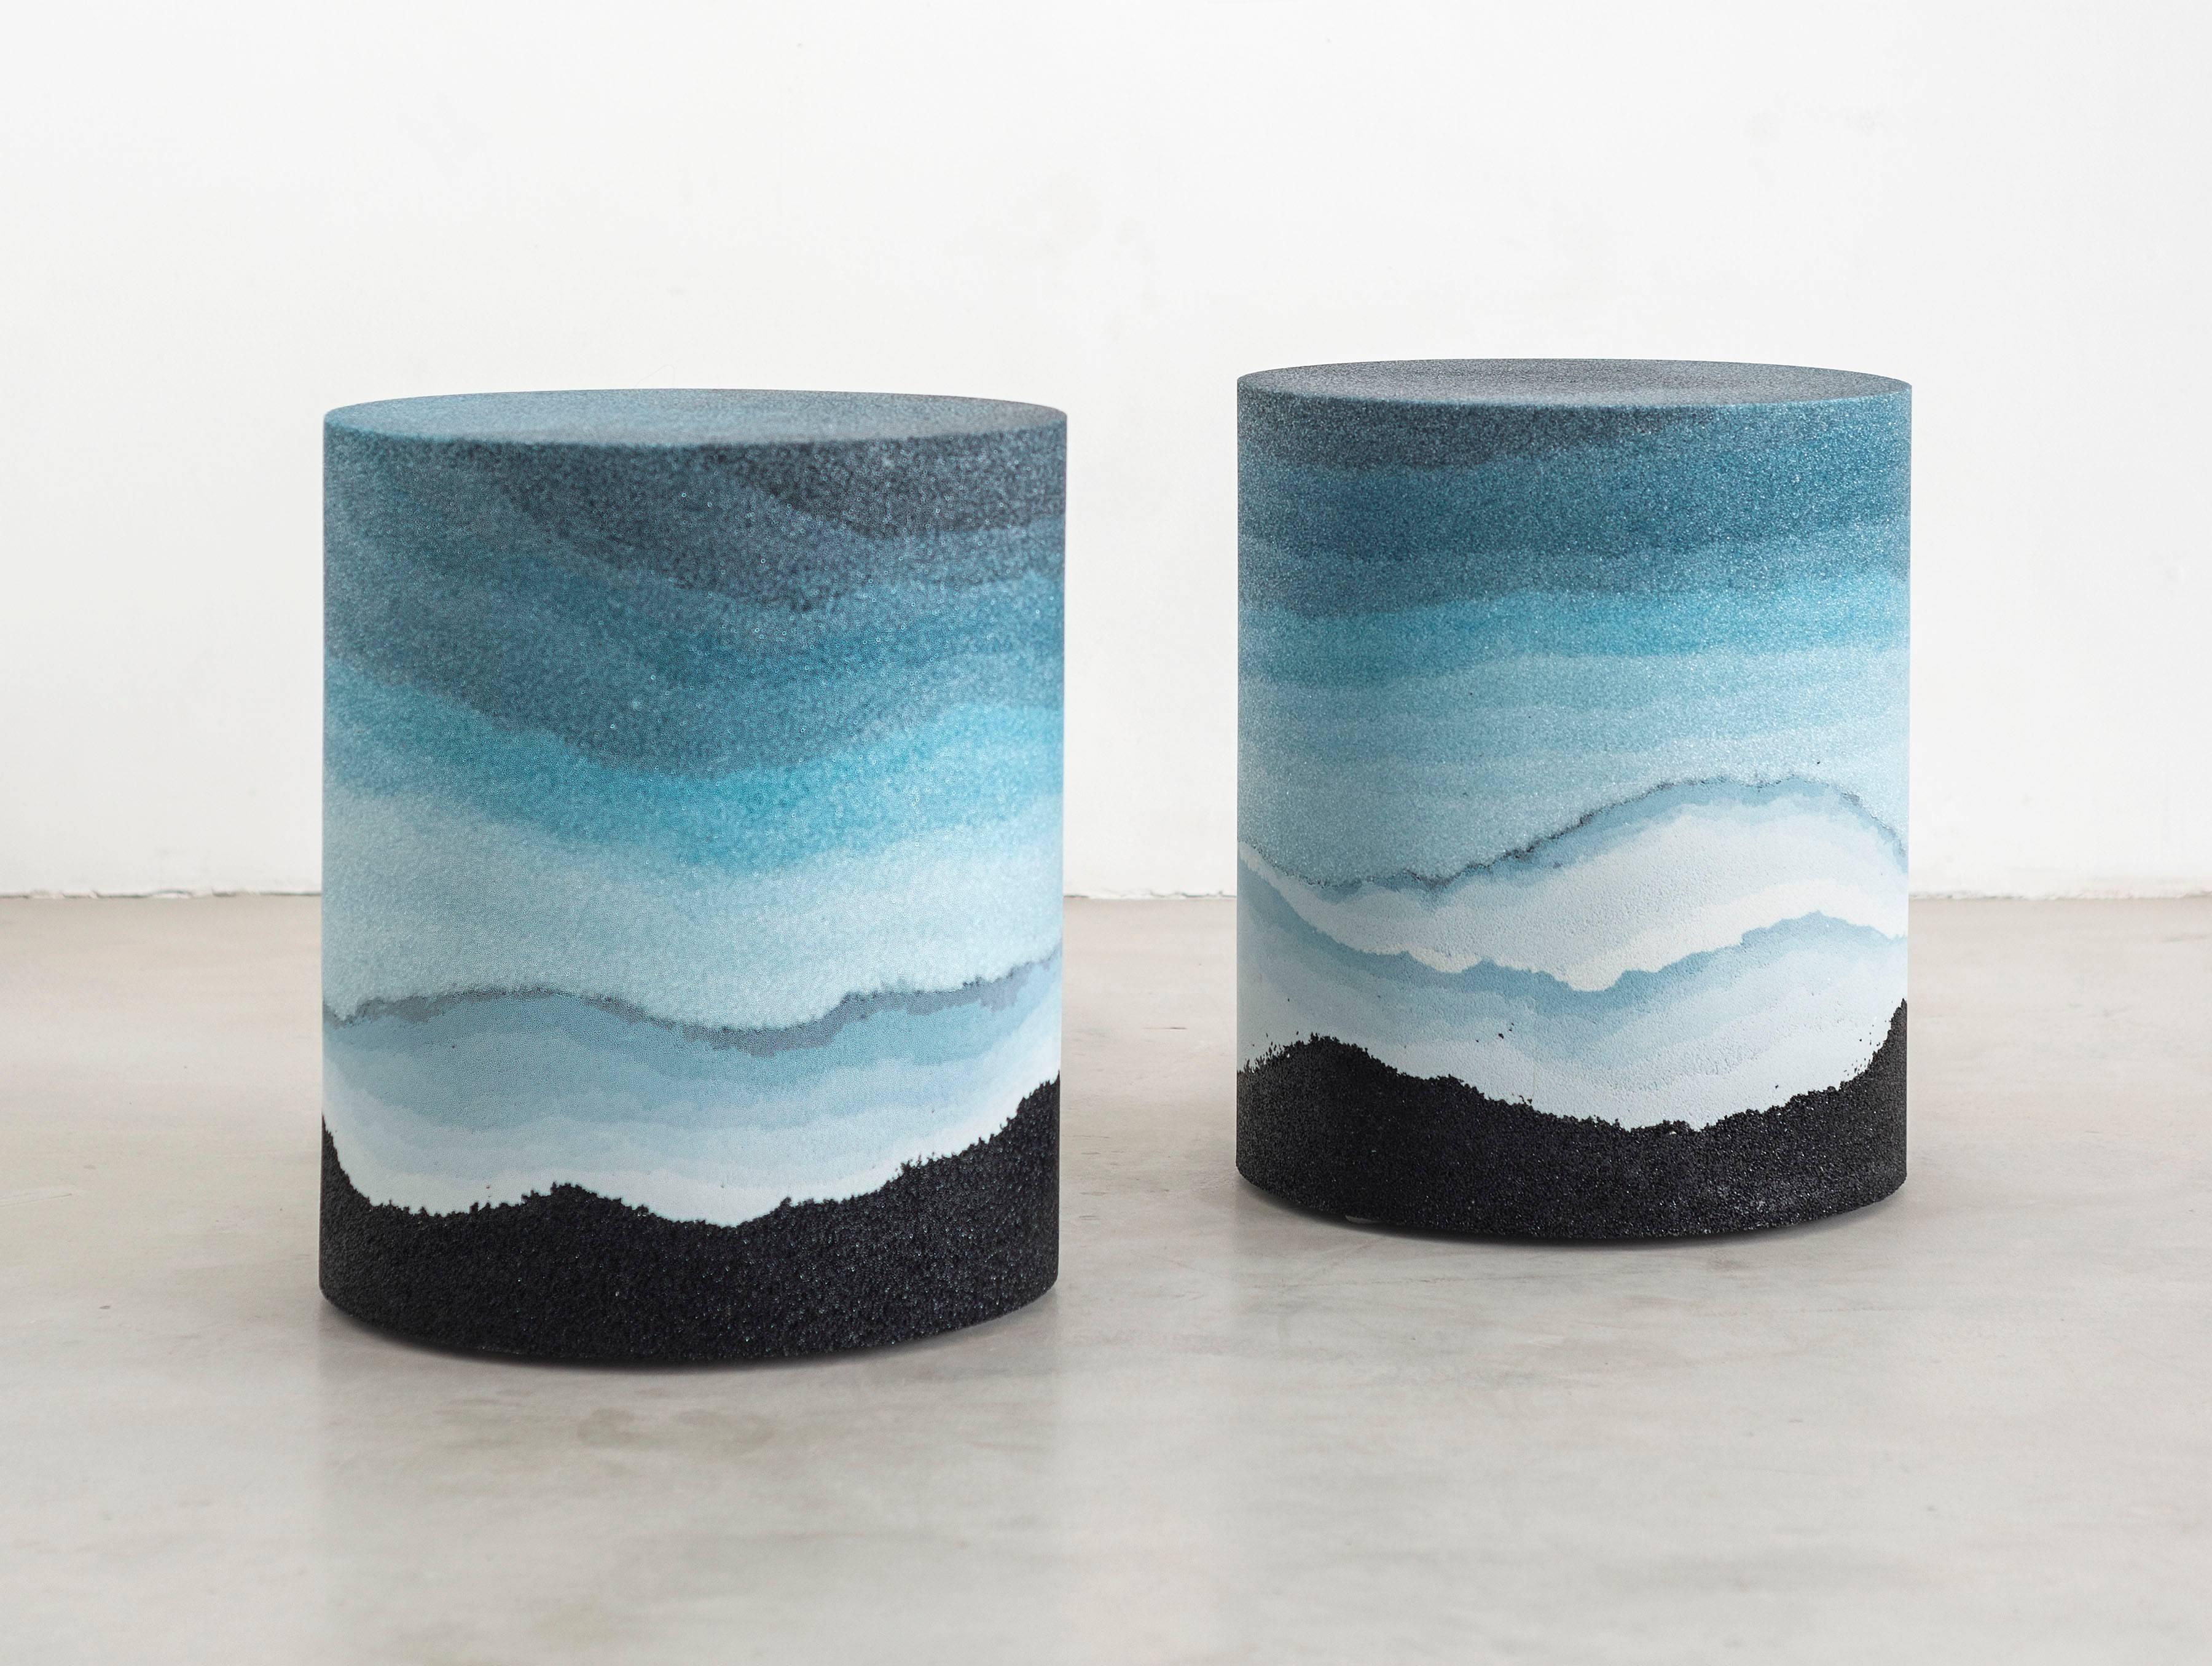 A layering of glass and silica, the made-to-order drum consists of gradients of tones and textures suggesting layers of earth, mountain ranges, otherworldly skies and bodies of water. The hand-dyed granules are stratified with delicate veins and